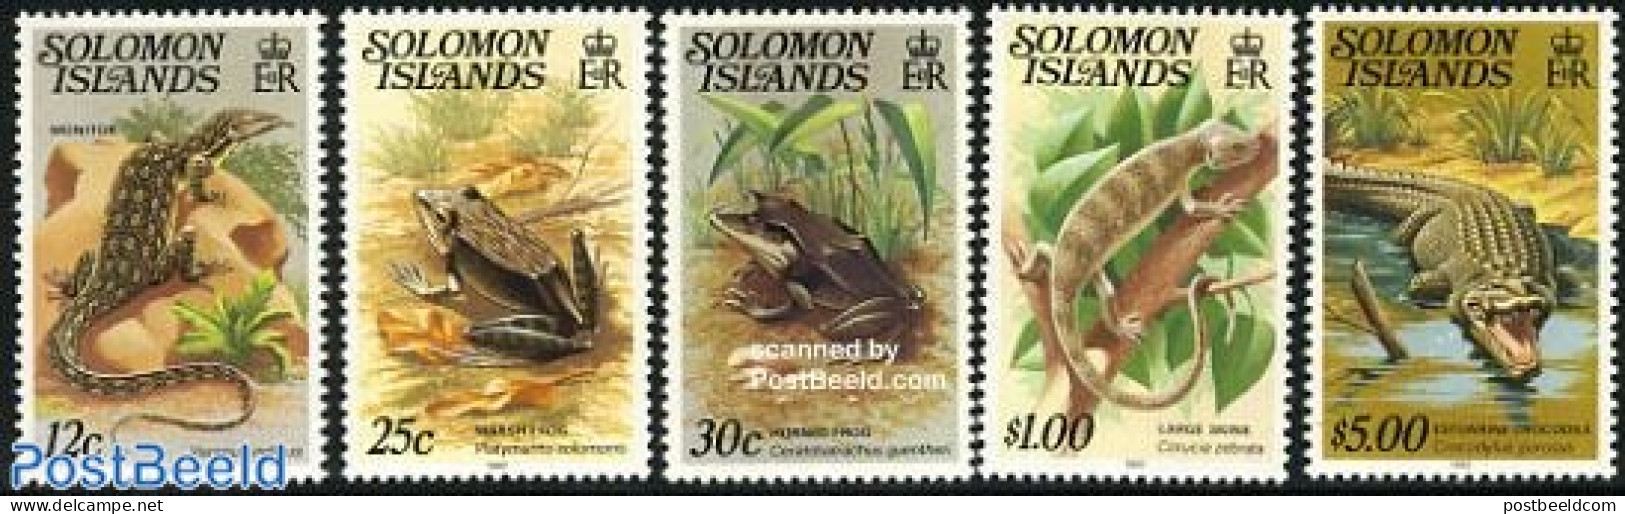 Solomon Islands 1982 Definitives 5v (with Year 1982), Mint NH, Nature - Crocodiles - Frogs & Toads - Reptiles - Salomon (Iles 1978-...)